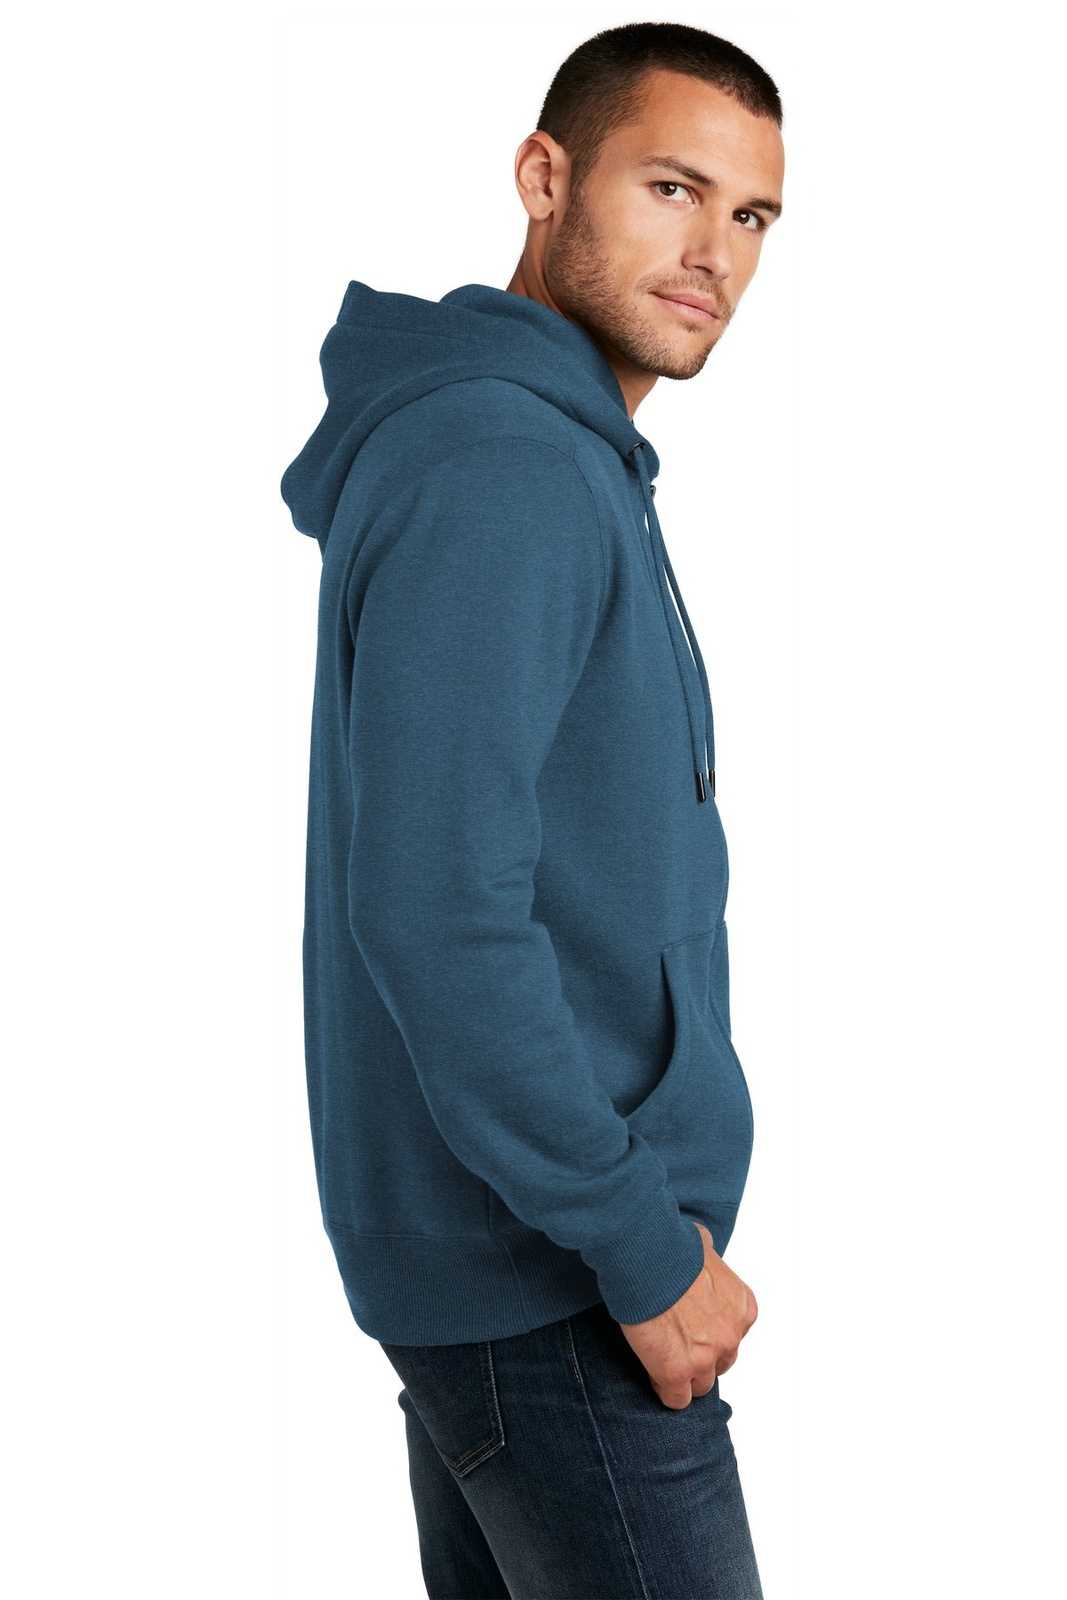 District DT1103 Perfect Weight Fleece Full-Zip Hoodie - Heathered Poseidon Blue - HIT a Double - 3